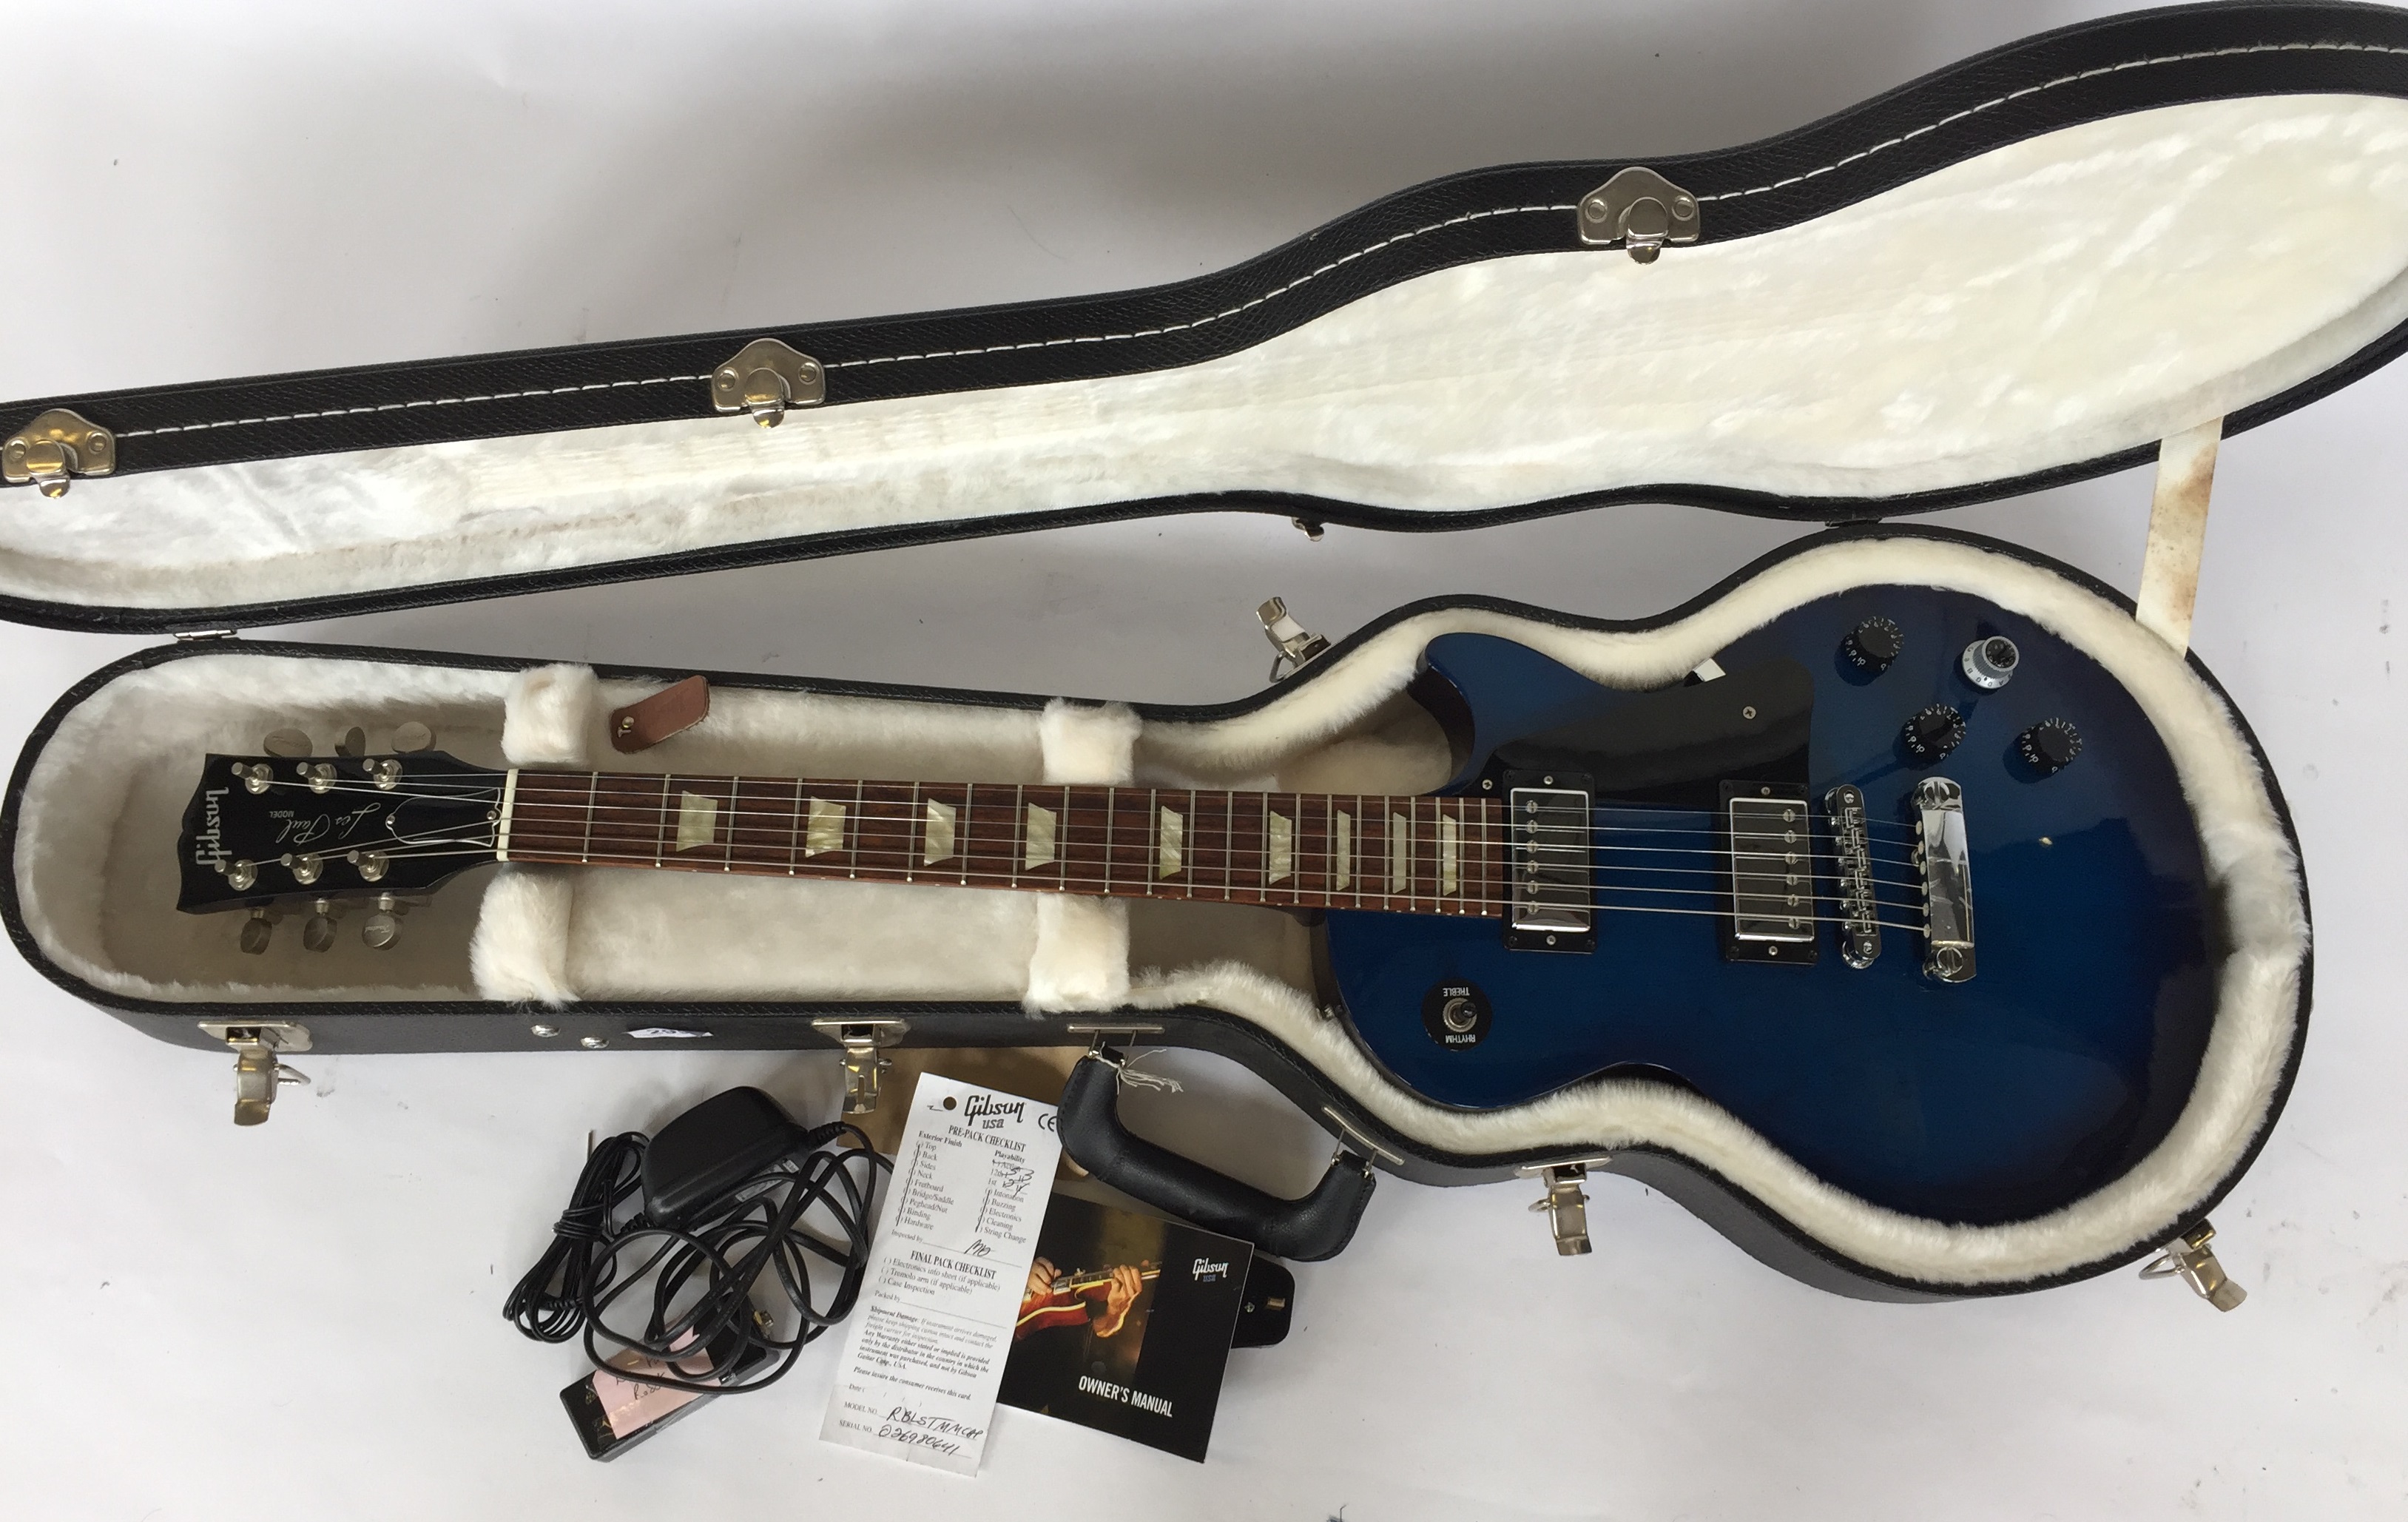 GIBSON LES PAUL ROBOT BLUE - Serial 026980641. - Image 7 of 8